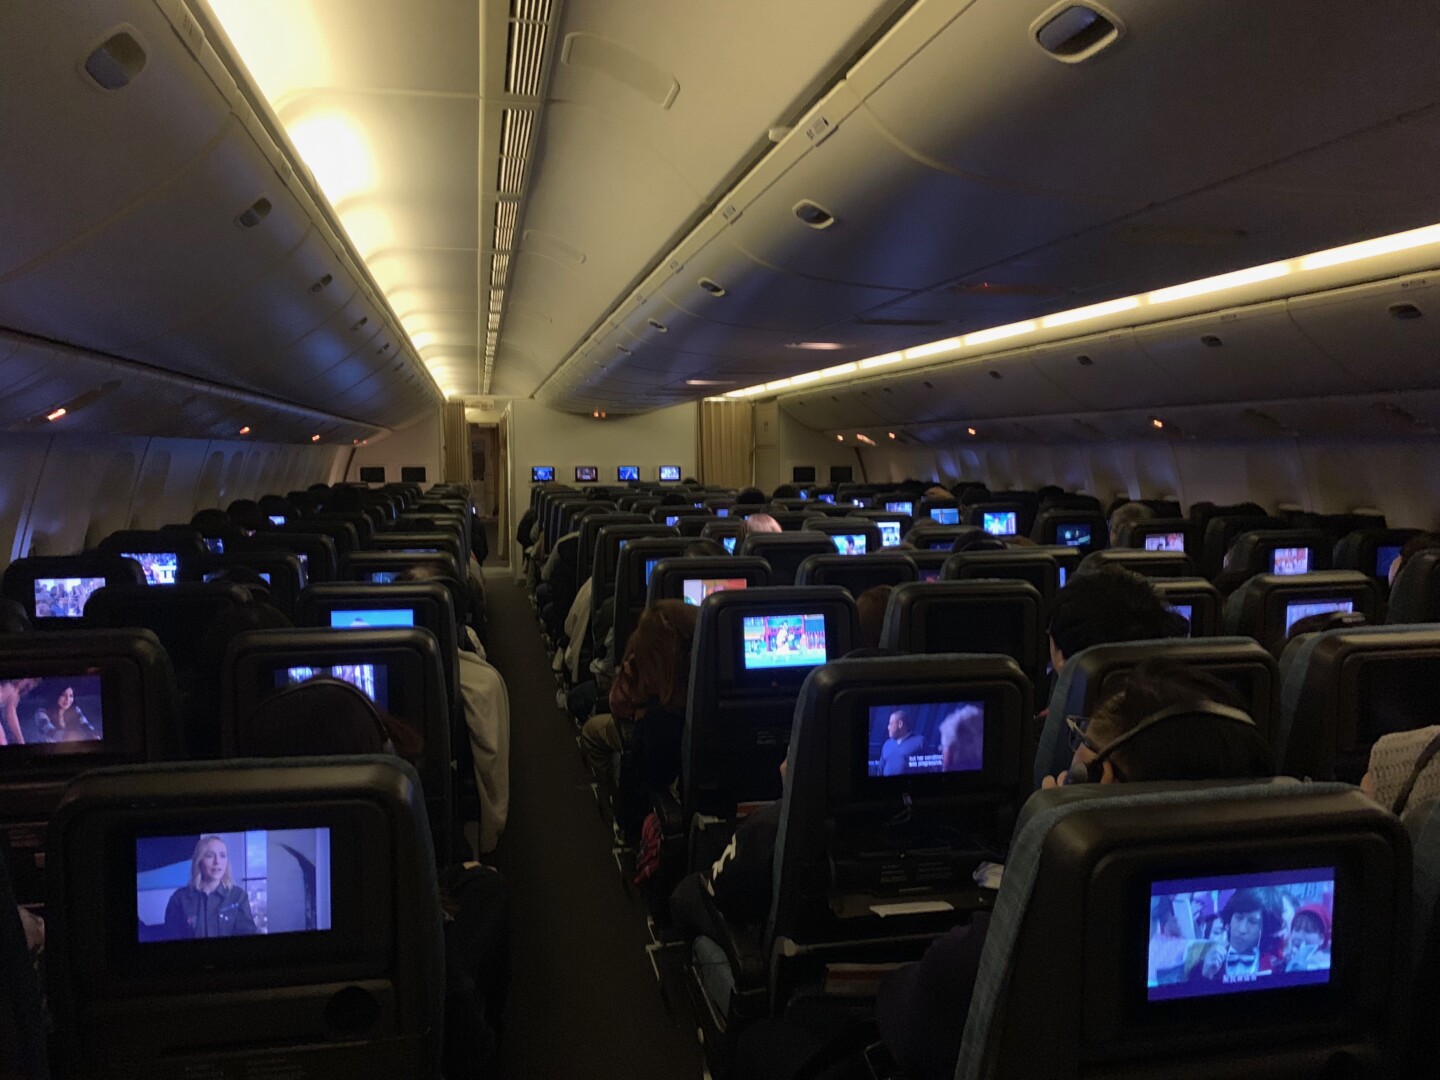 a group of people sitting in an airplane with monitors